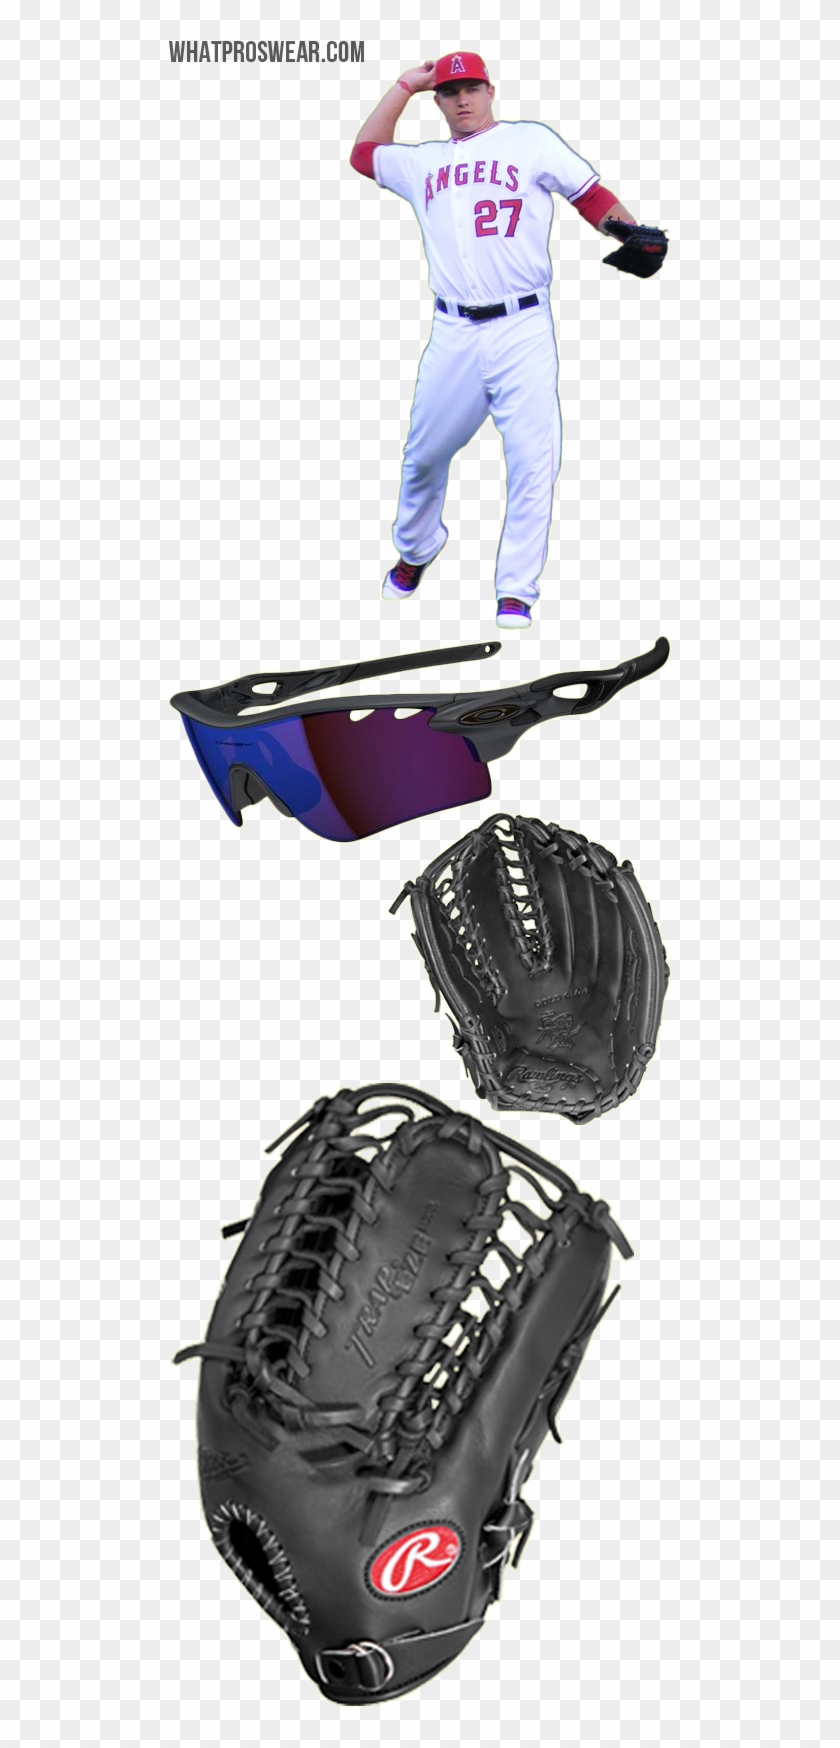 Mike Trout Glove Model, Mike Trout Sunglasses, Rawlings - Mike Trout 2016 Baseball Glove Rawlings Clipart #5523881